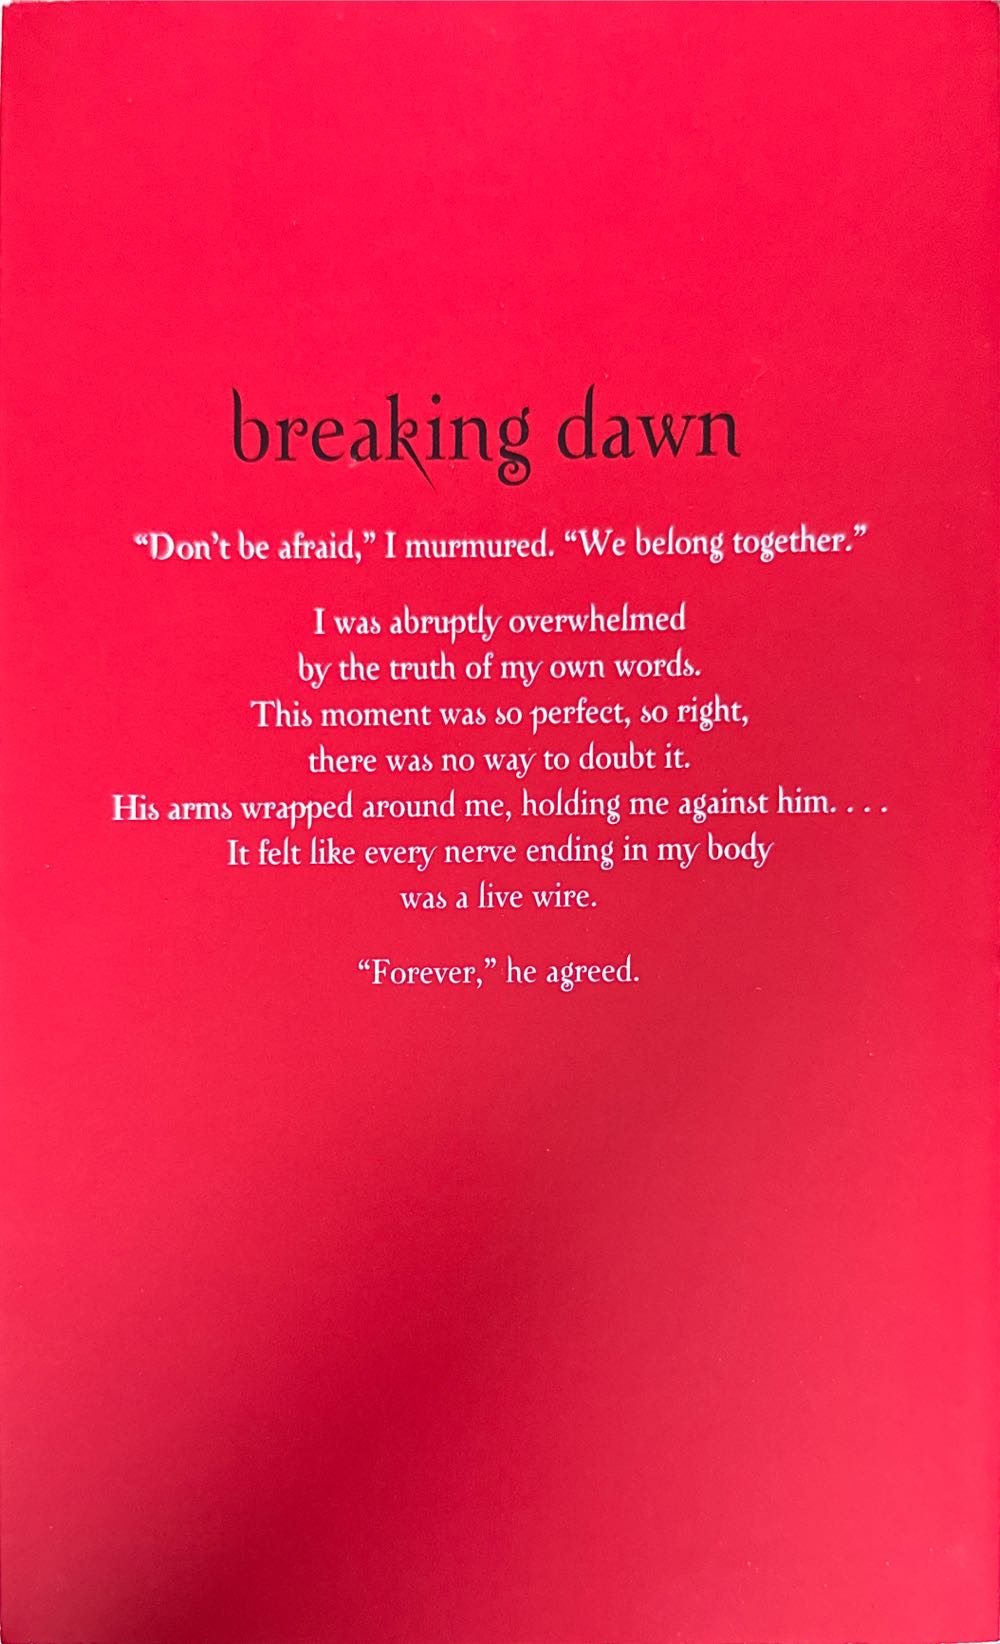 Breaking Dawn - Stephenie Meyer (Atom Books - Paperback) book collectible [Barcode 9781907410512] - Main Image 2